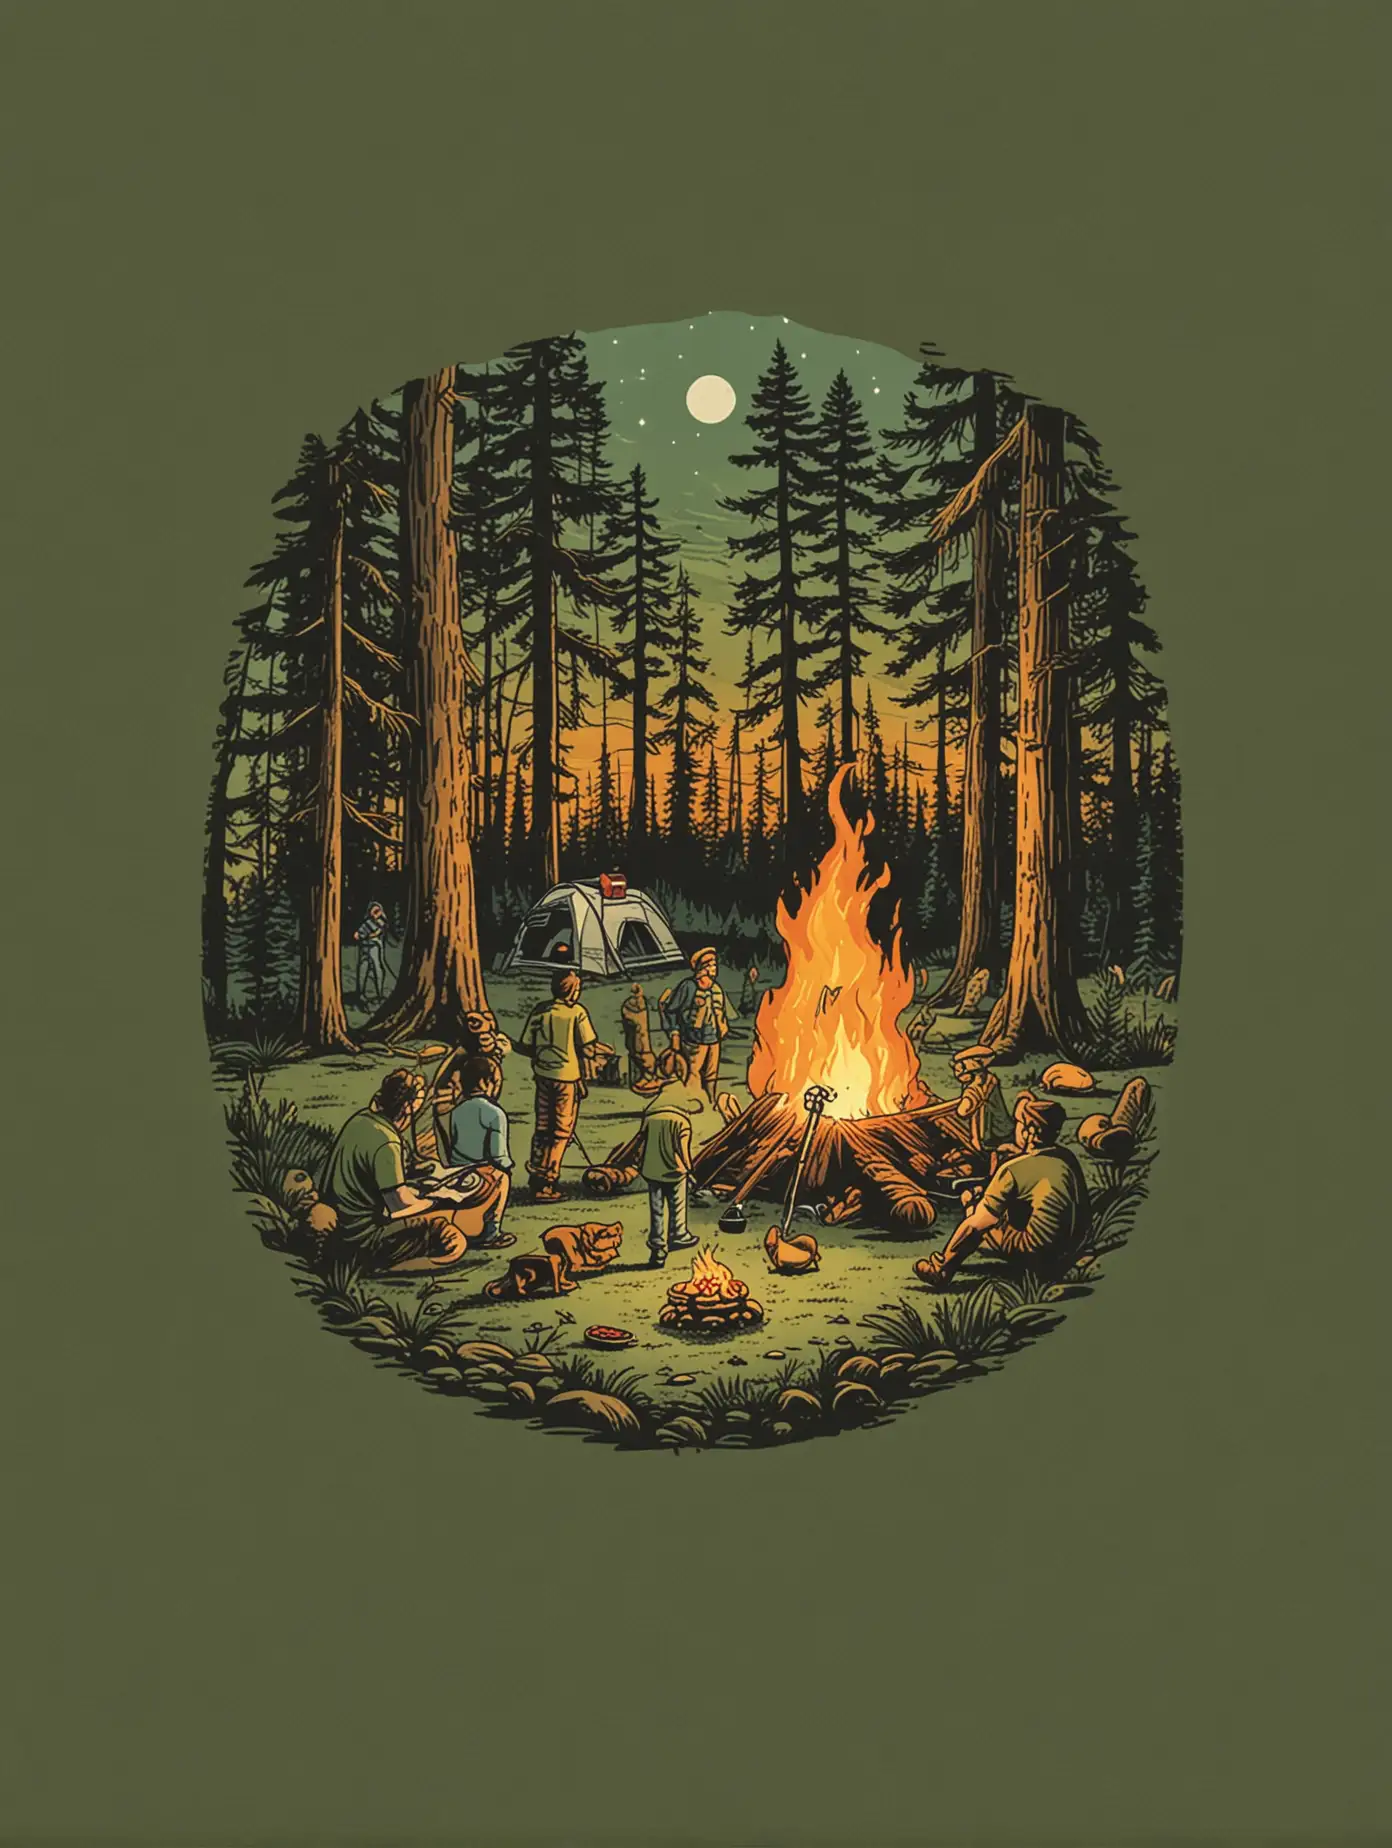 T-shirt Design for "Bigfoot Designs" Forrest Scene at a campsite with a fire with people roasting a hotdog with  a small bigfoot in the distance at night time  spot color design on a military green background